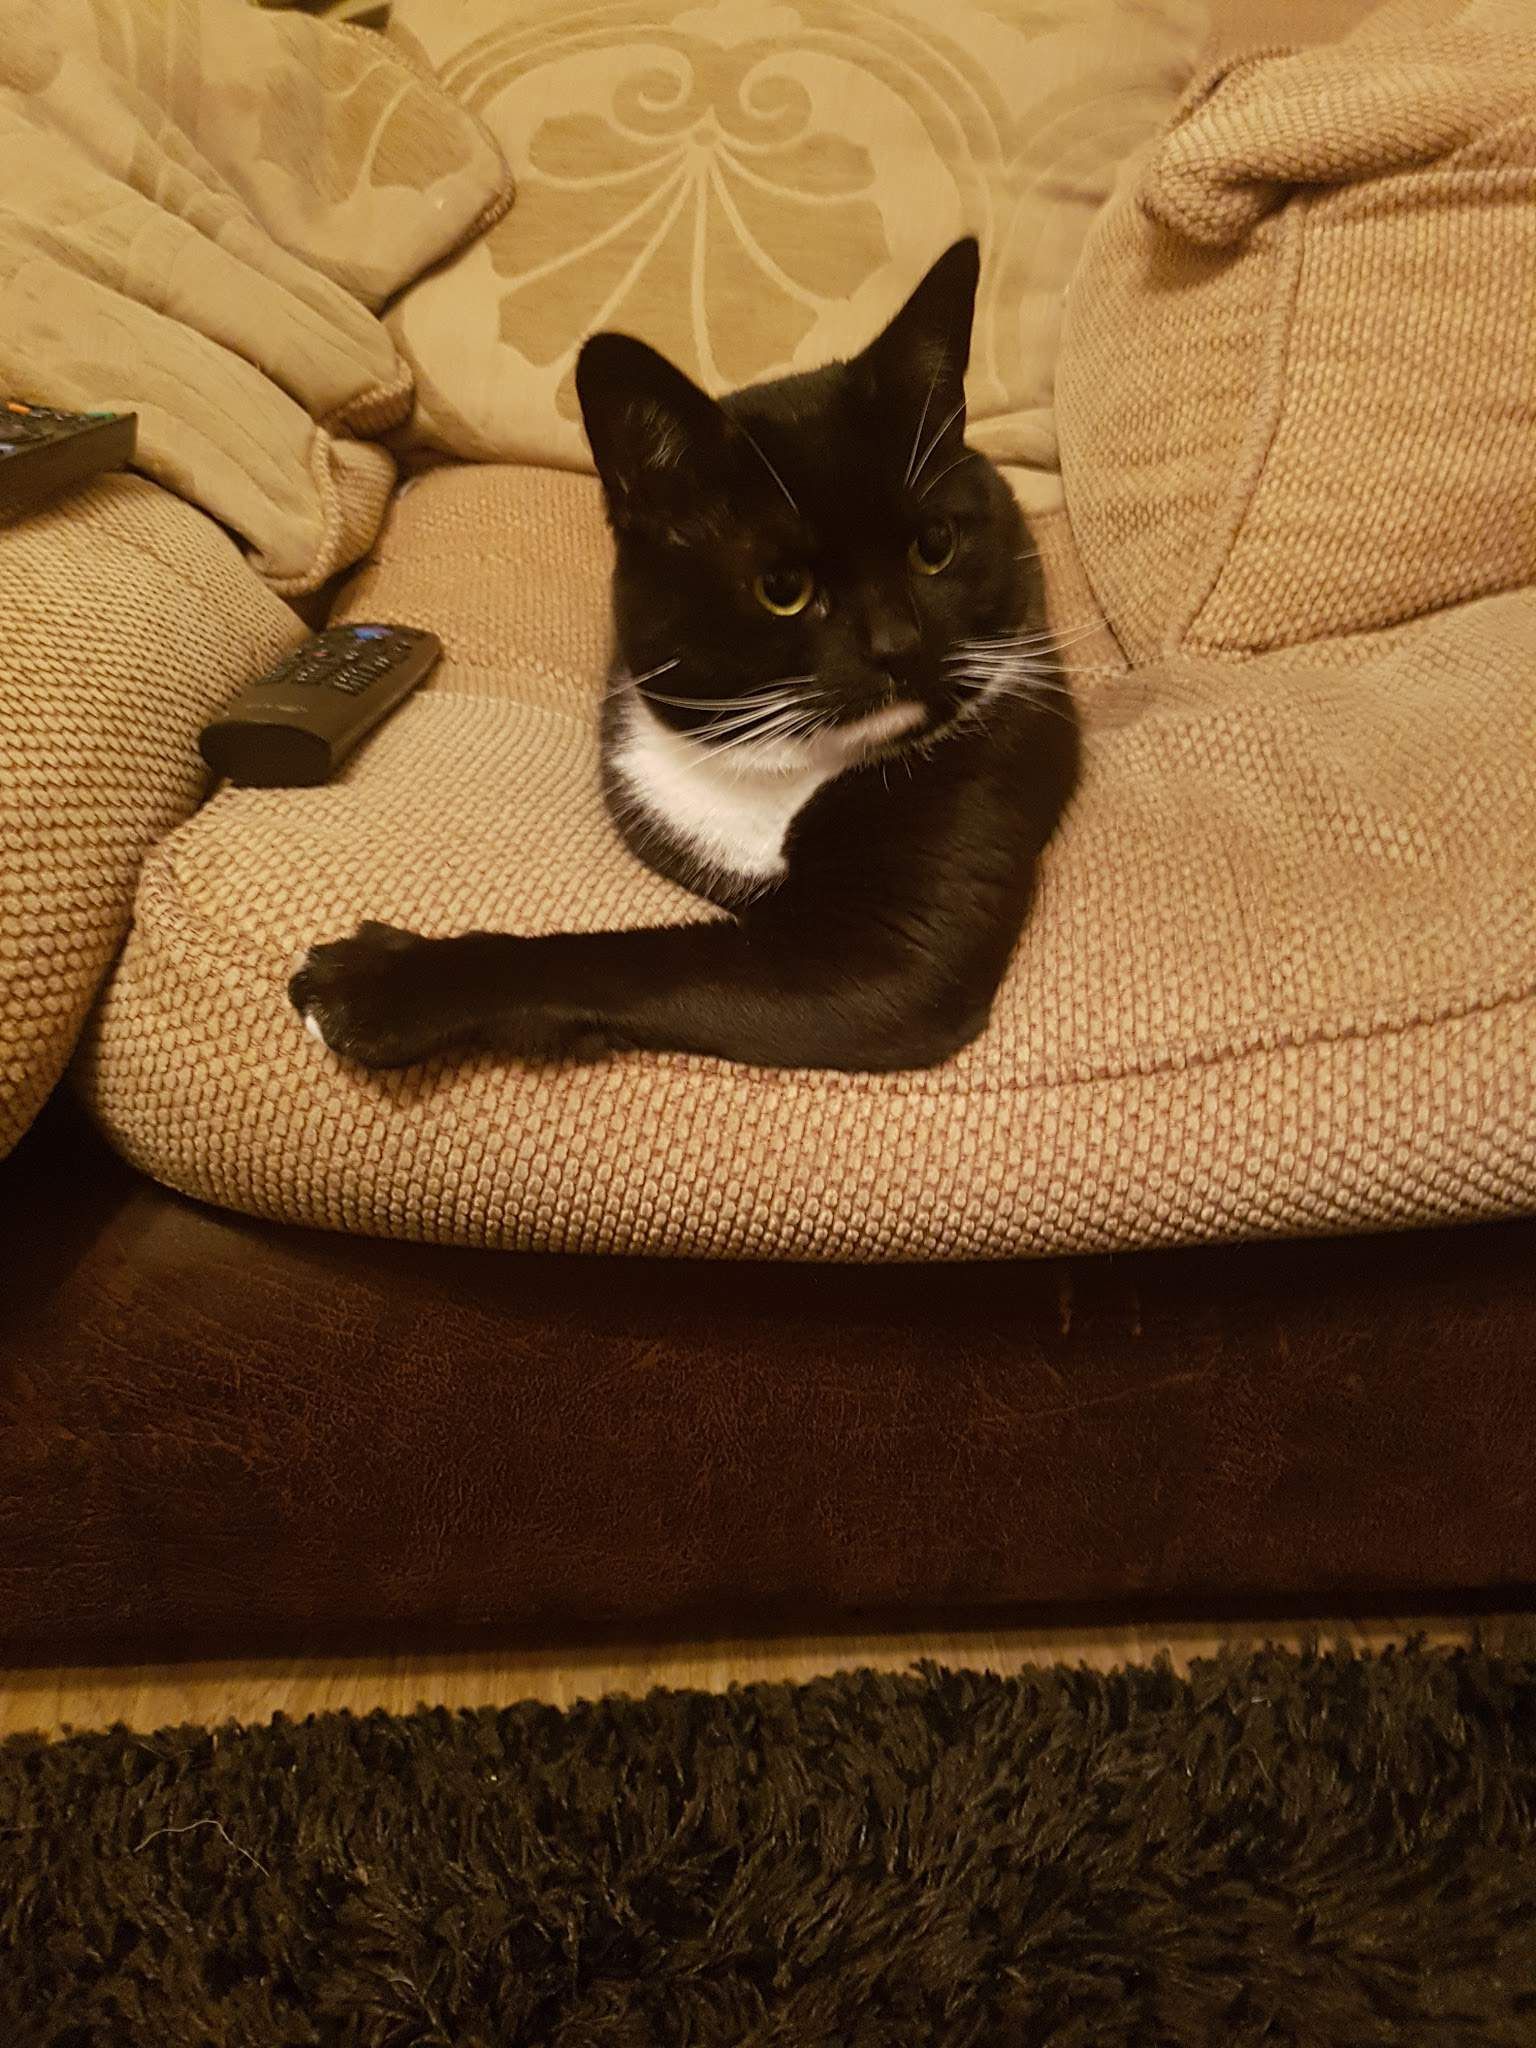 My fiance took this pic that makes the cat look like he's made out of a head and just one massive arm.